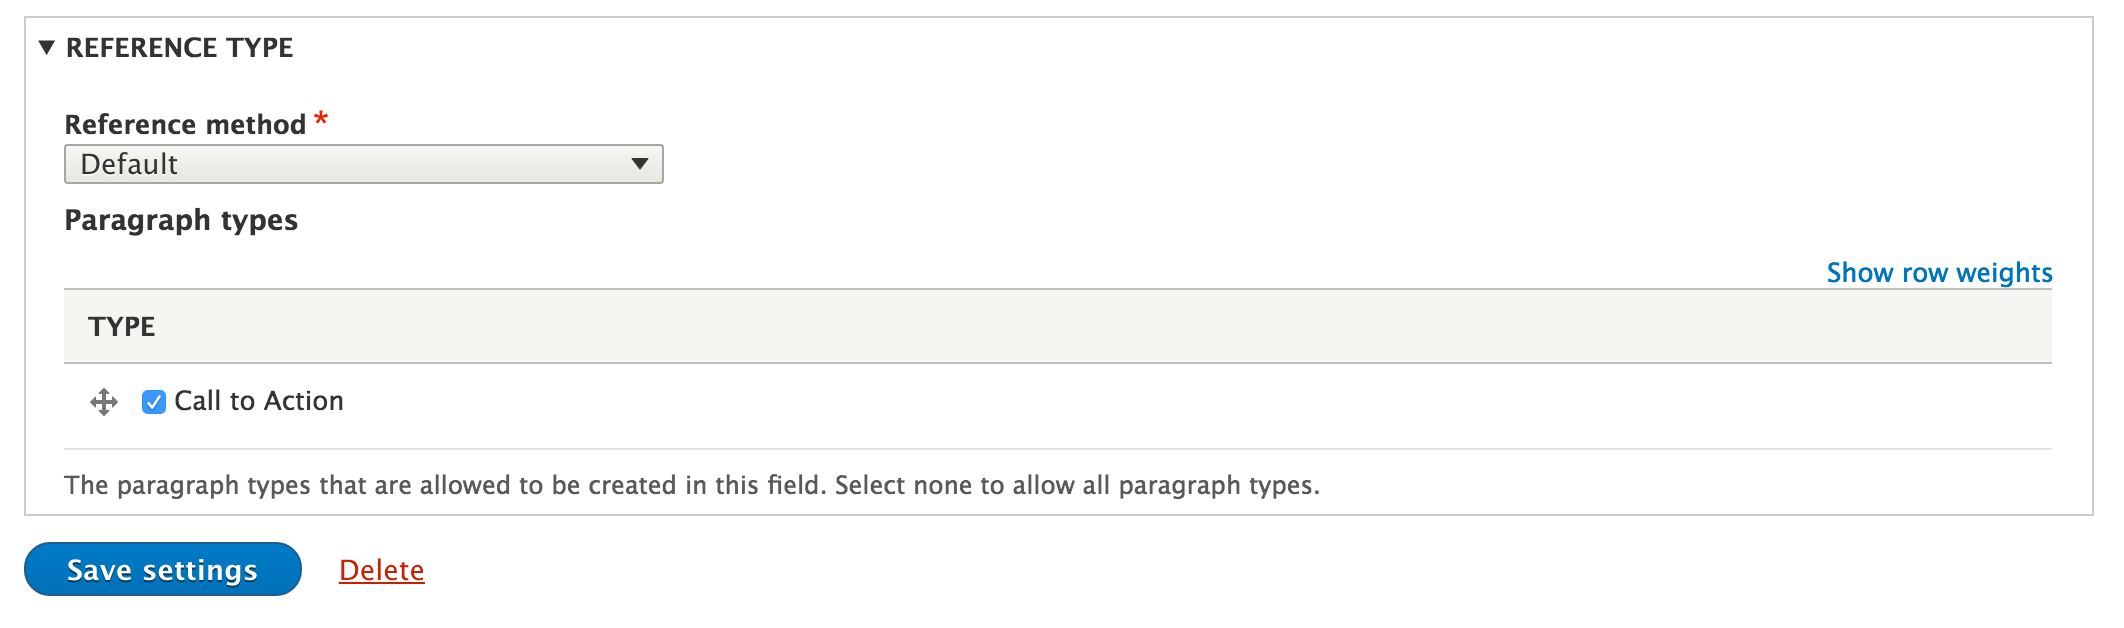 Reference types for the paragraph field